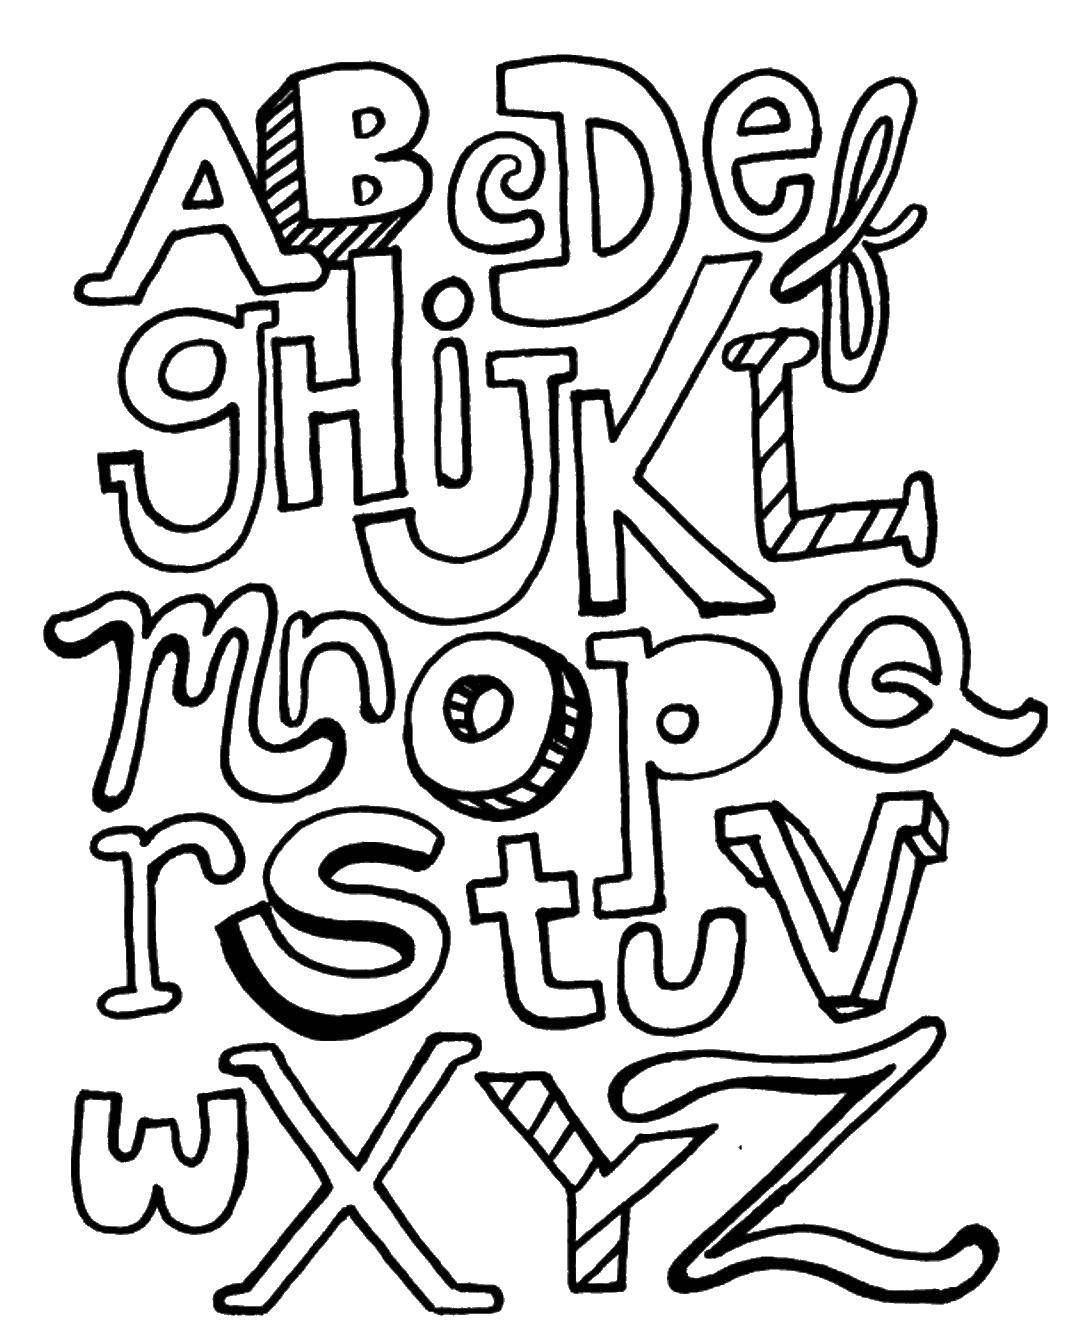 Coloring English alphabet. Category English. Tags:  The alphabet, letters.